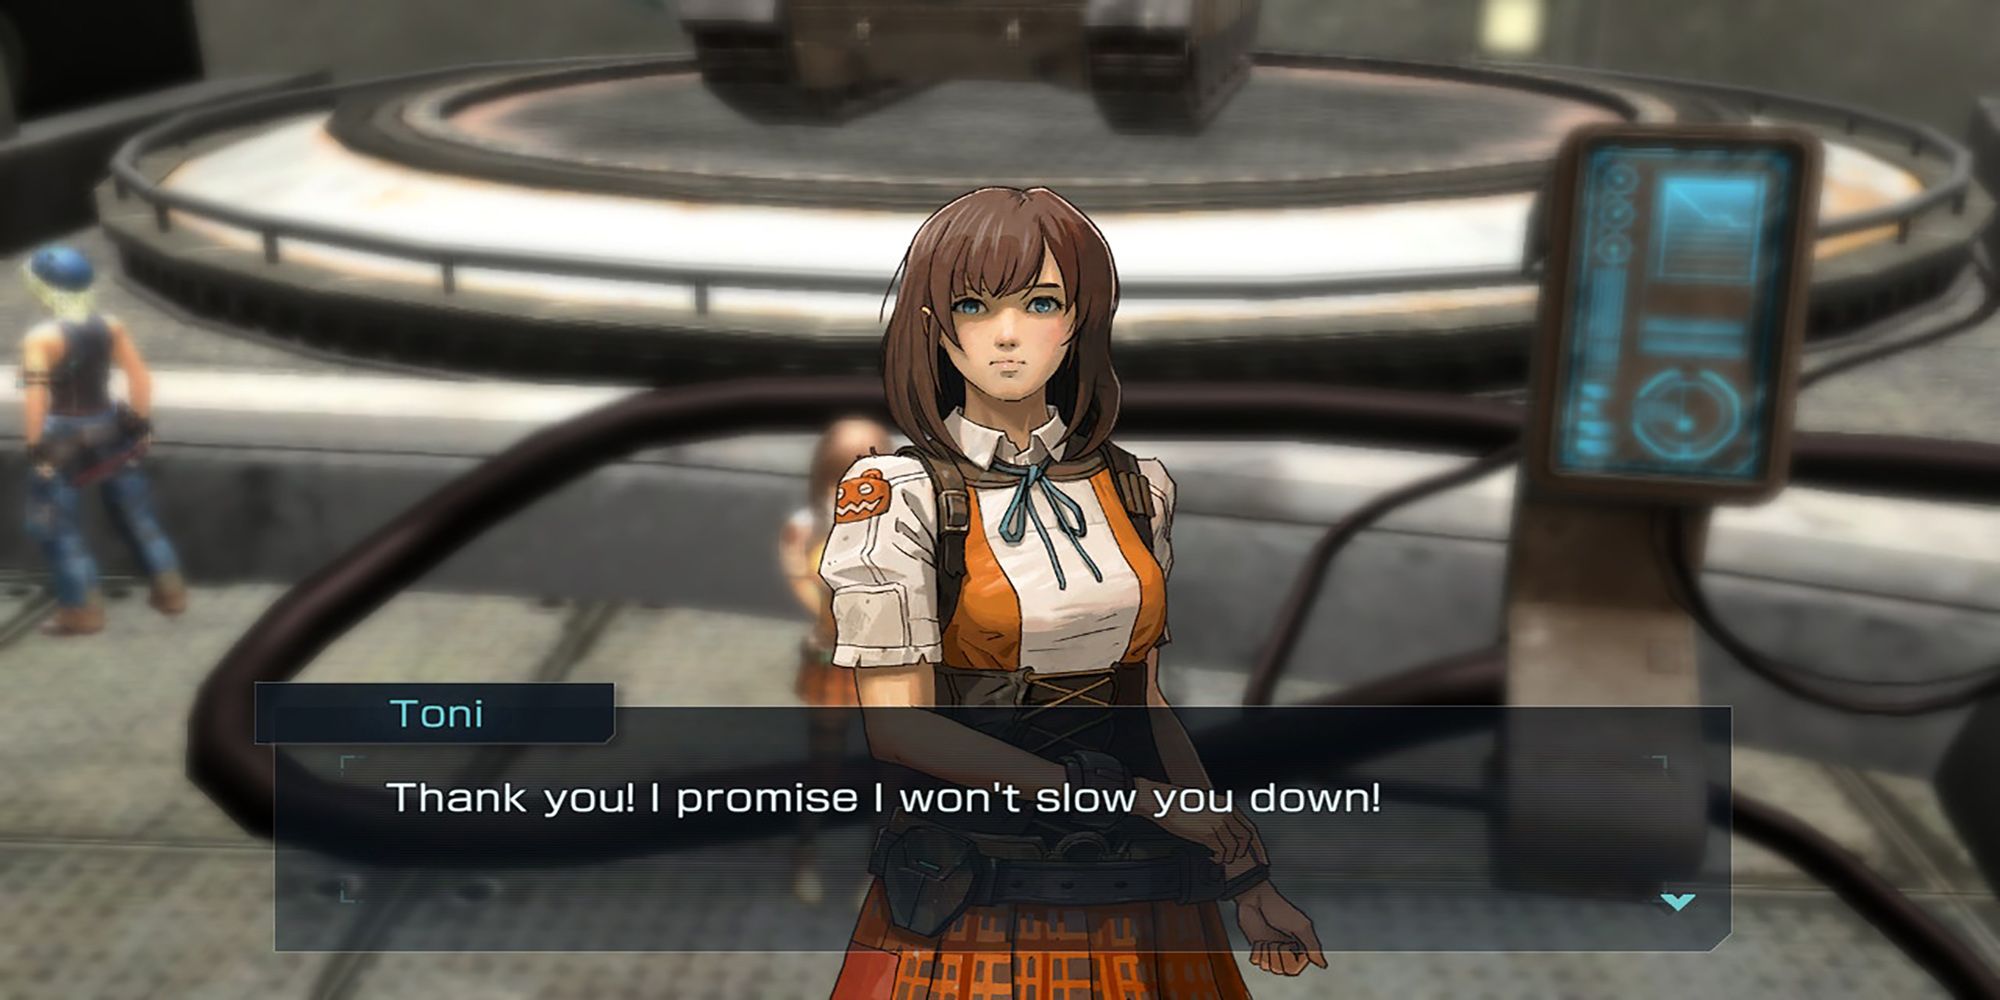 Toni promises not to become dead weight in a conversation with Talis at Iron Base in Metal Max Xeno Reborn.